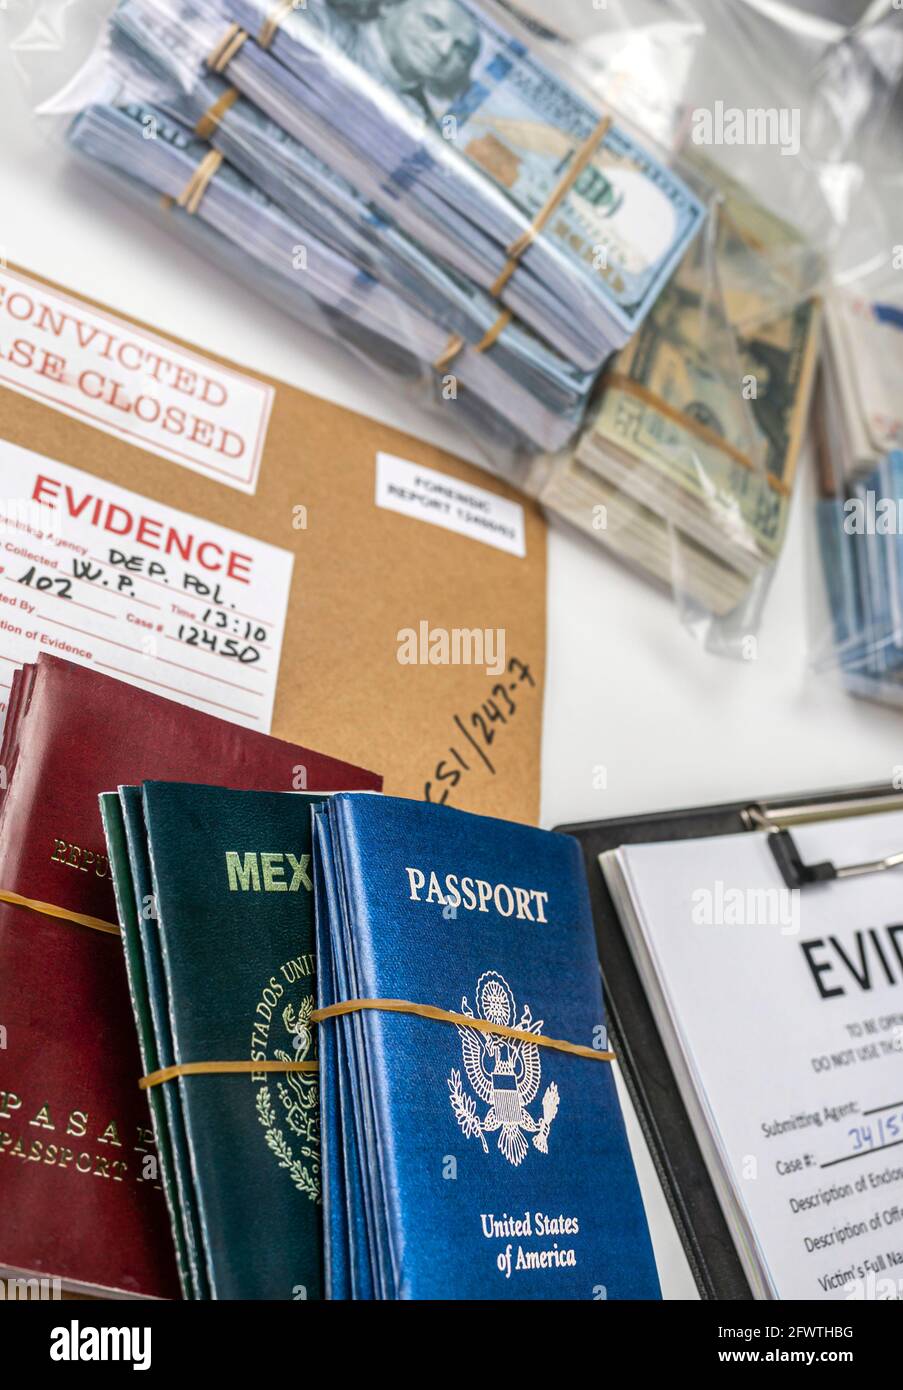 Different passports decommissioned in police investigation unit, conceptual image Stock Photo